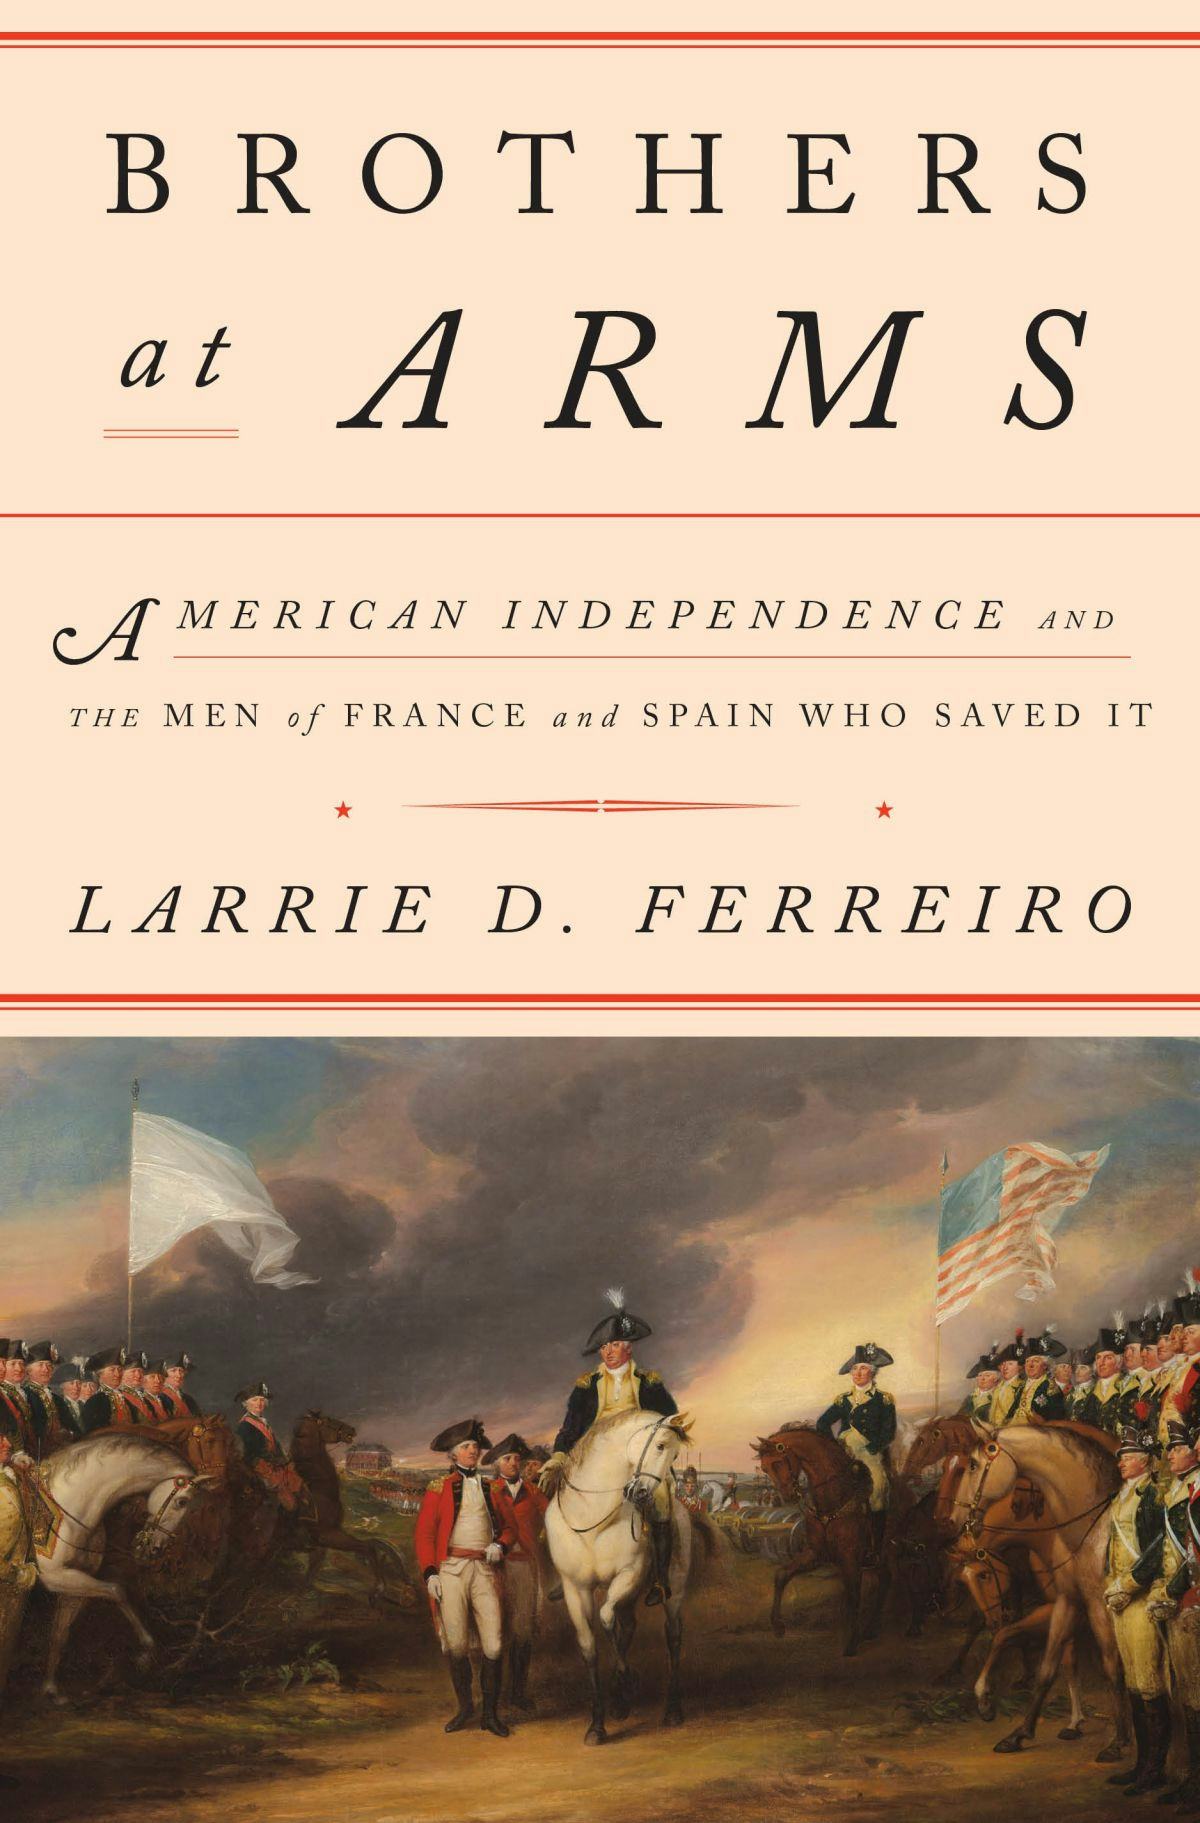 Book cover of Brother at Arms, author Stevens Professor Larrie Ferreiro 